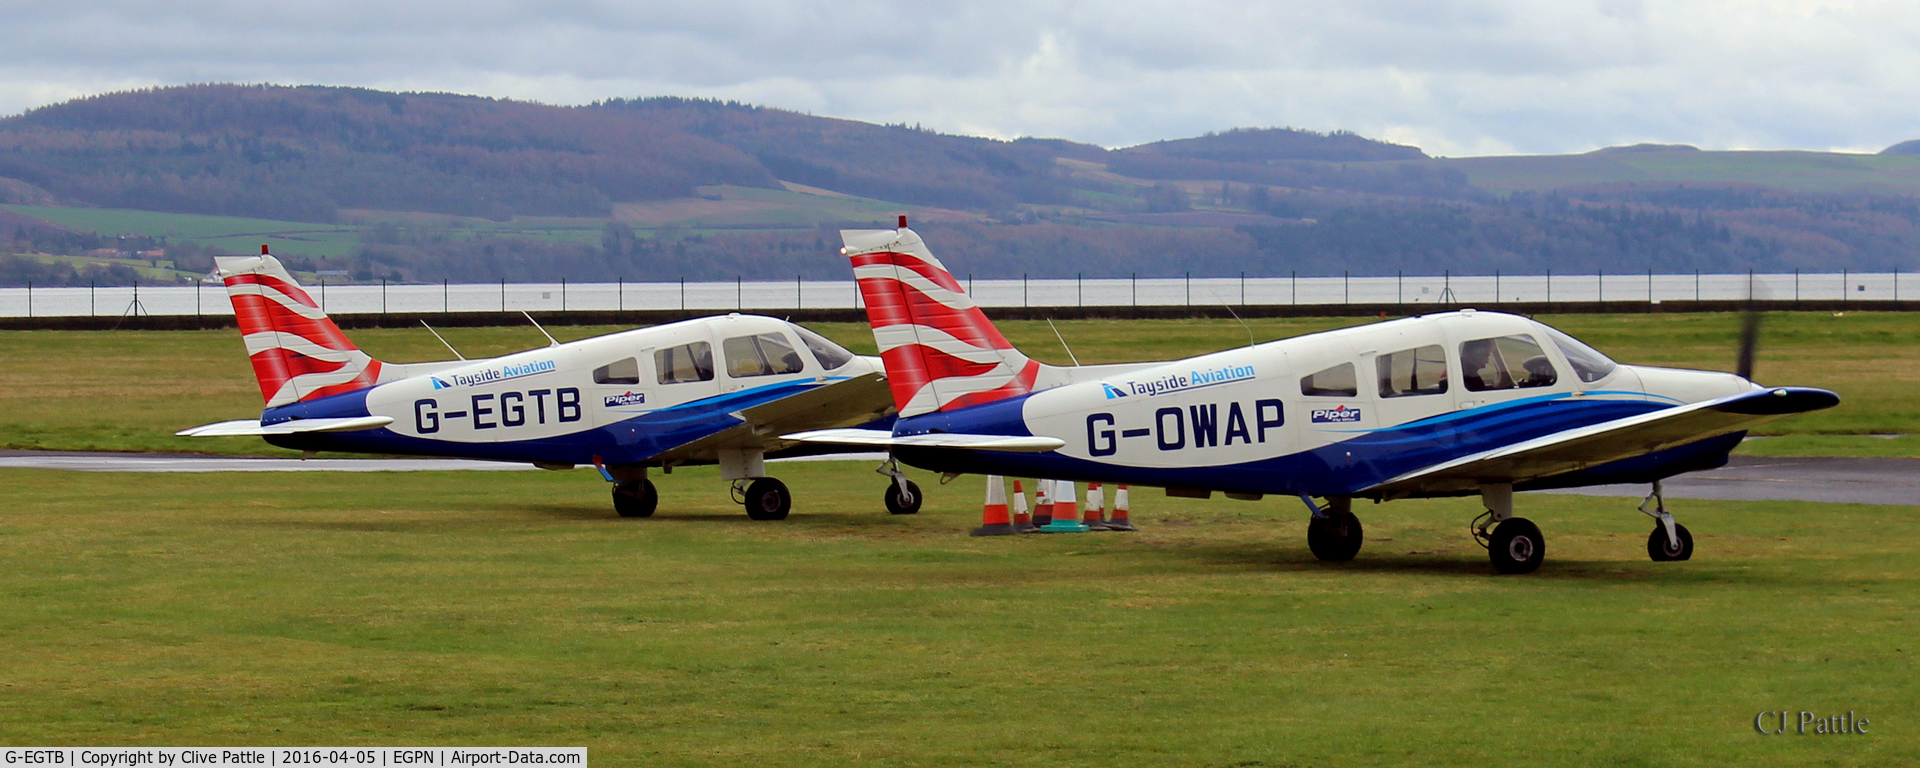 G-EGTB, 1978 Piper PA-28-161 Cherokee Warrior II C/N 28-7816074, Out to grass with fellow Tayside Aviation PA-28 G-OWAP at Dundee Riverside EGPN